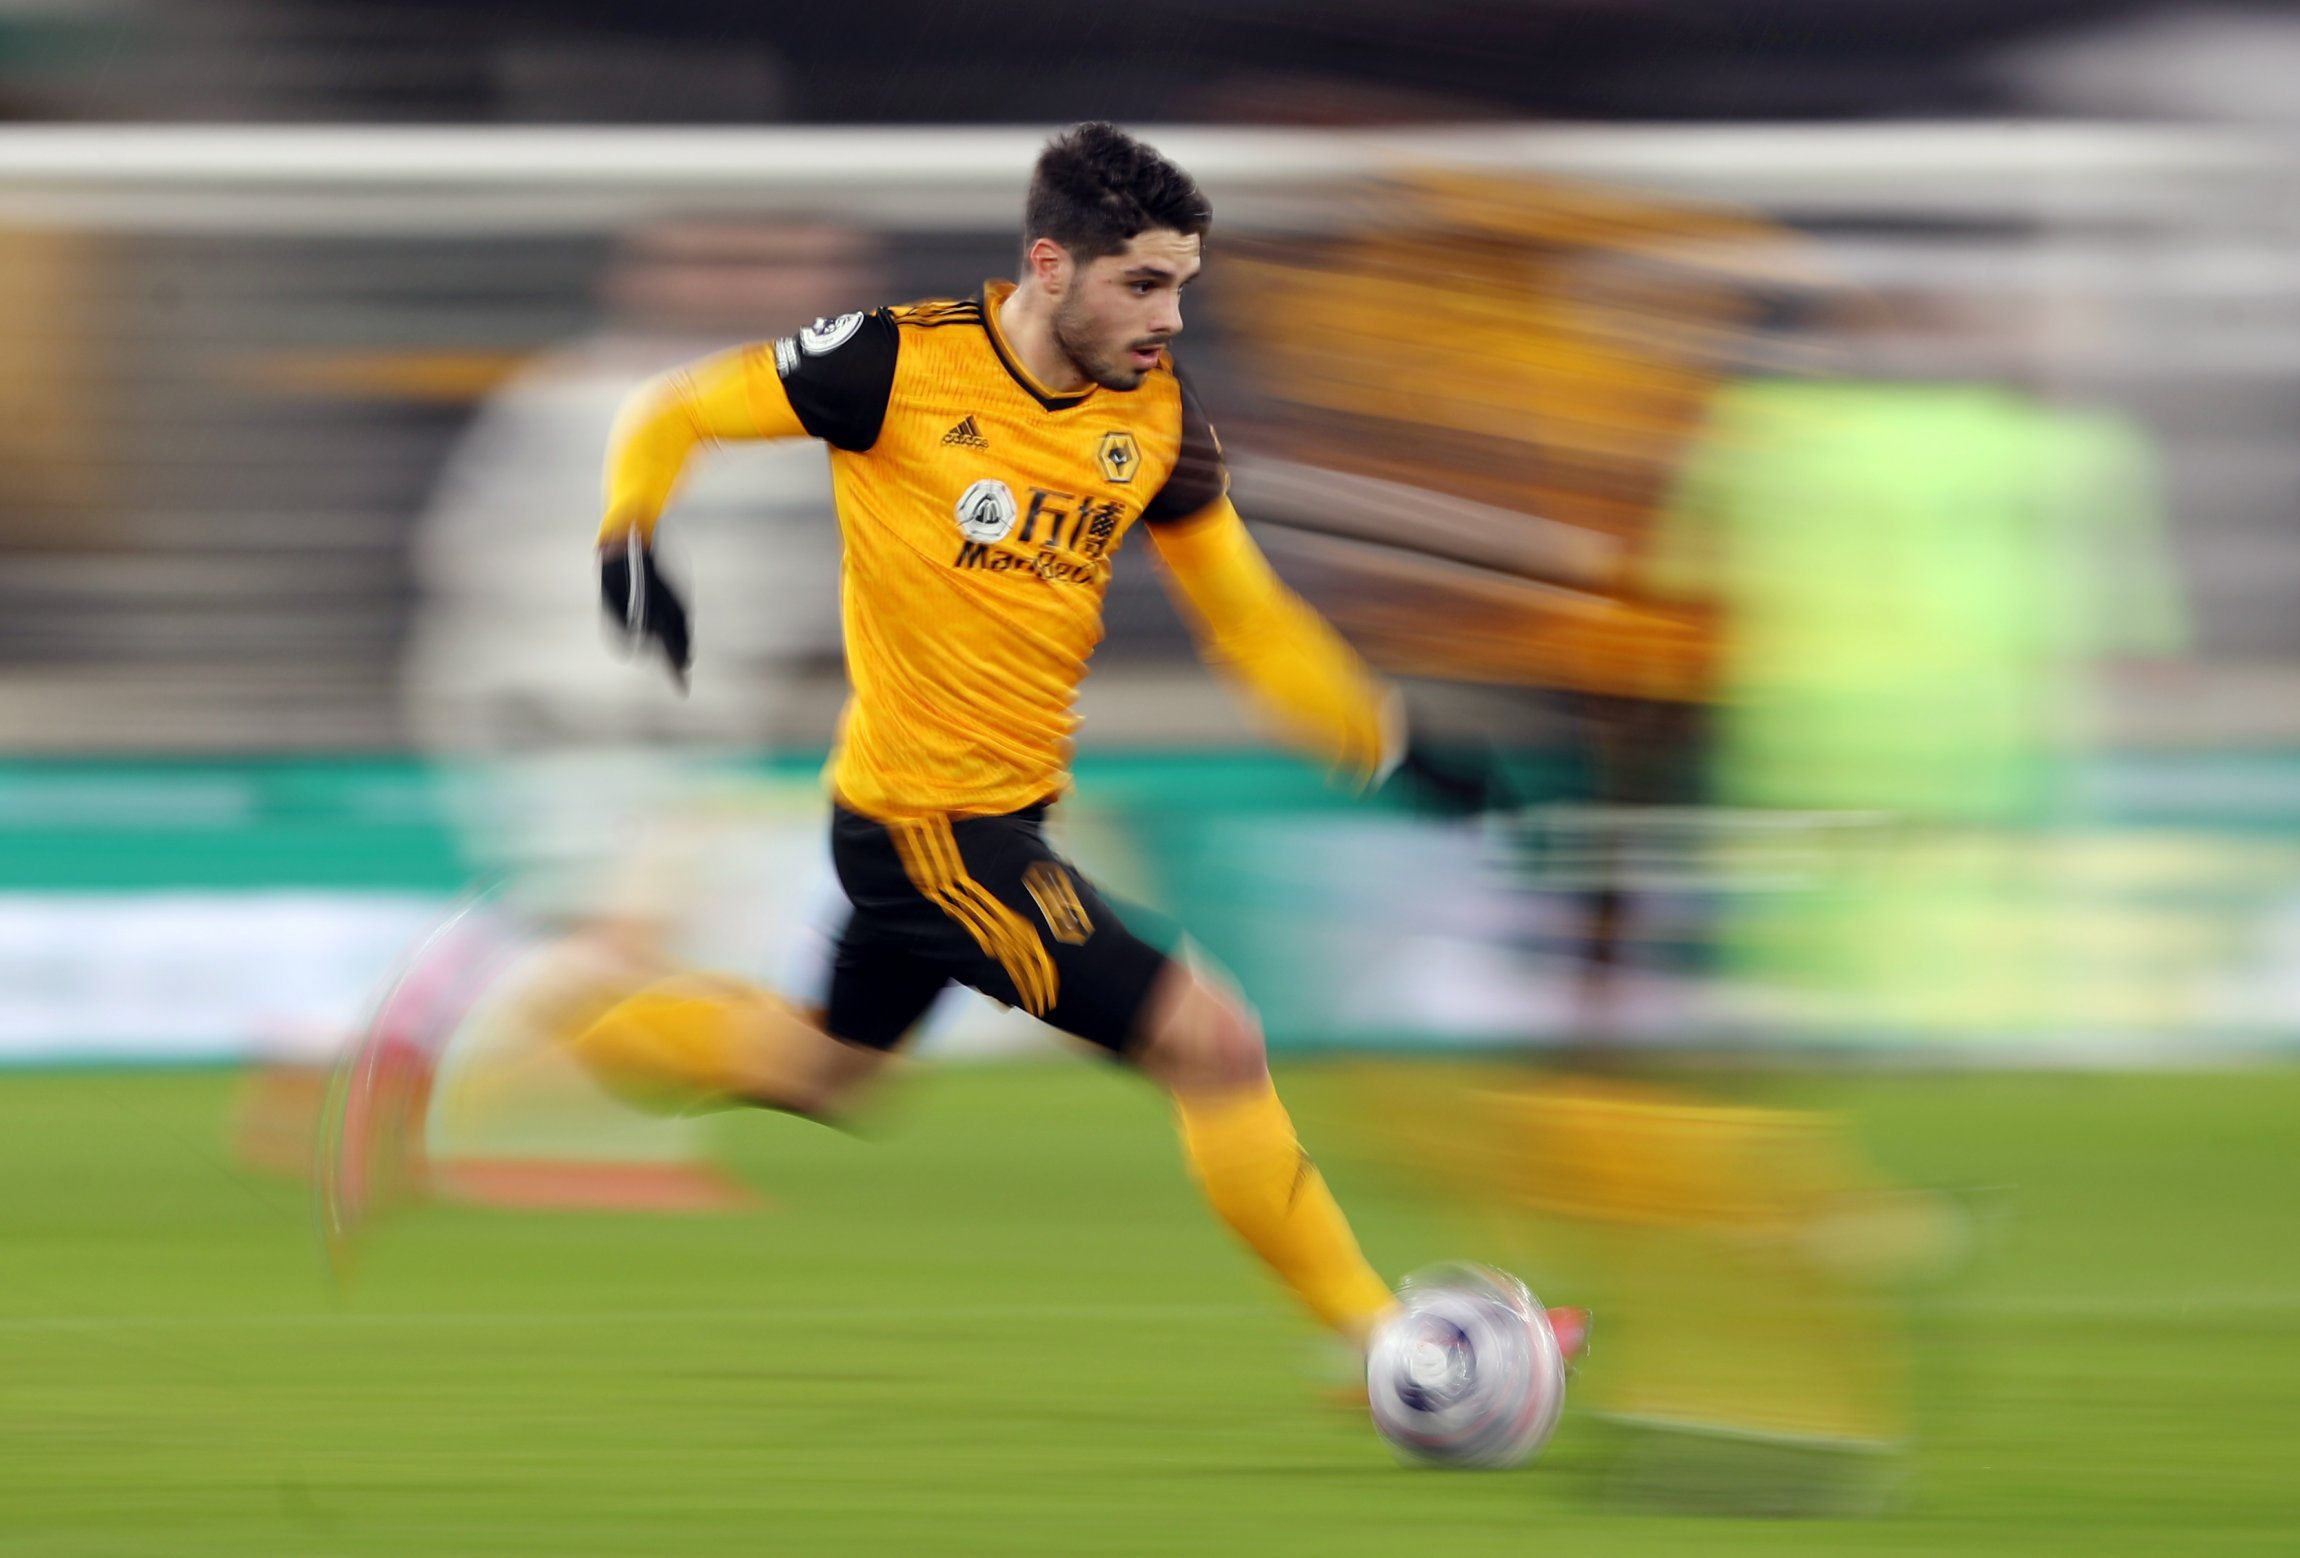 Bruno Lage, Fosun, Jeff Shi, Molineux, The Old Gold, Wolves, Wolves fans, Wolves info, Wolves latest, Wolves news, Wolves updates, WWFC, WWFC news, WWFC update, Premier League, Premier League news, Wolverhampton Wanderers, Wolves transfer news, Pedro Neto, Wolves injury news, Wolves injury update, Tim Spiers, Tim Spiers news, Tim Spiers update, 
